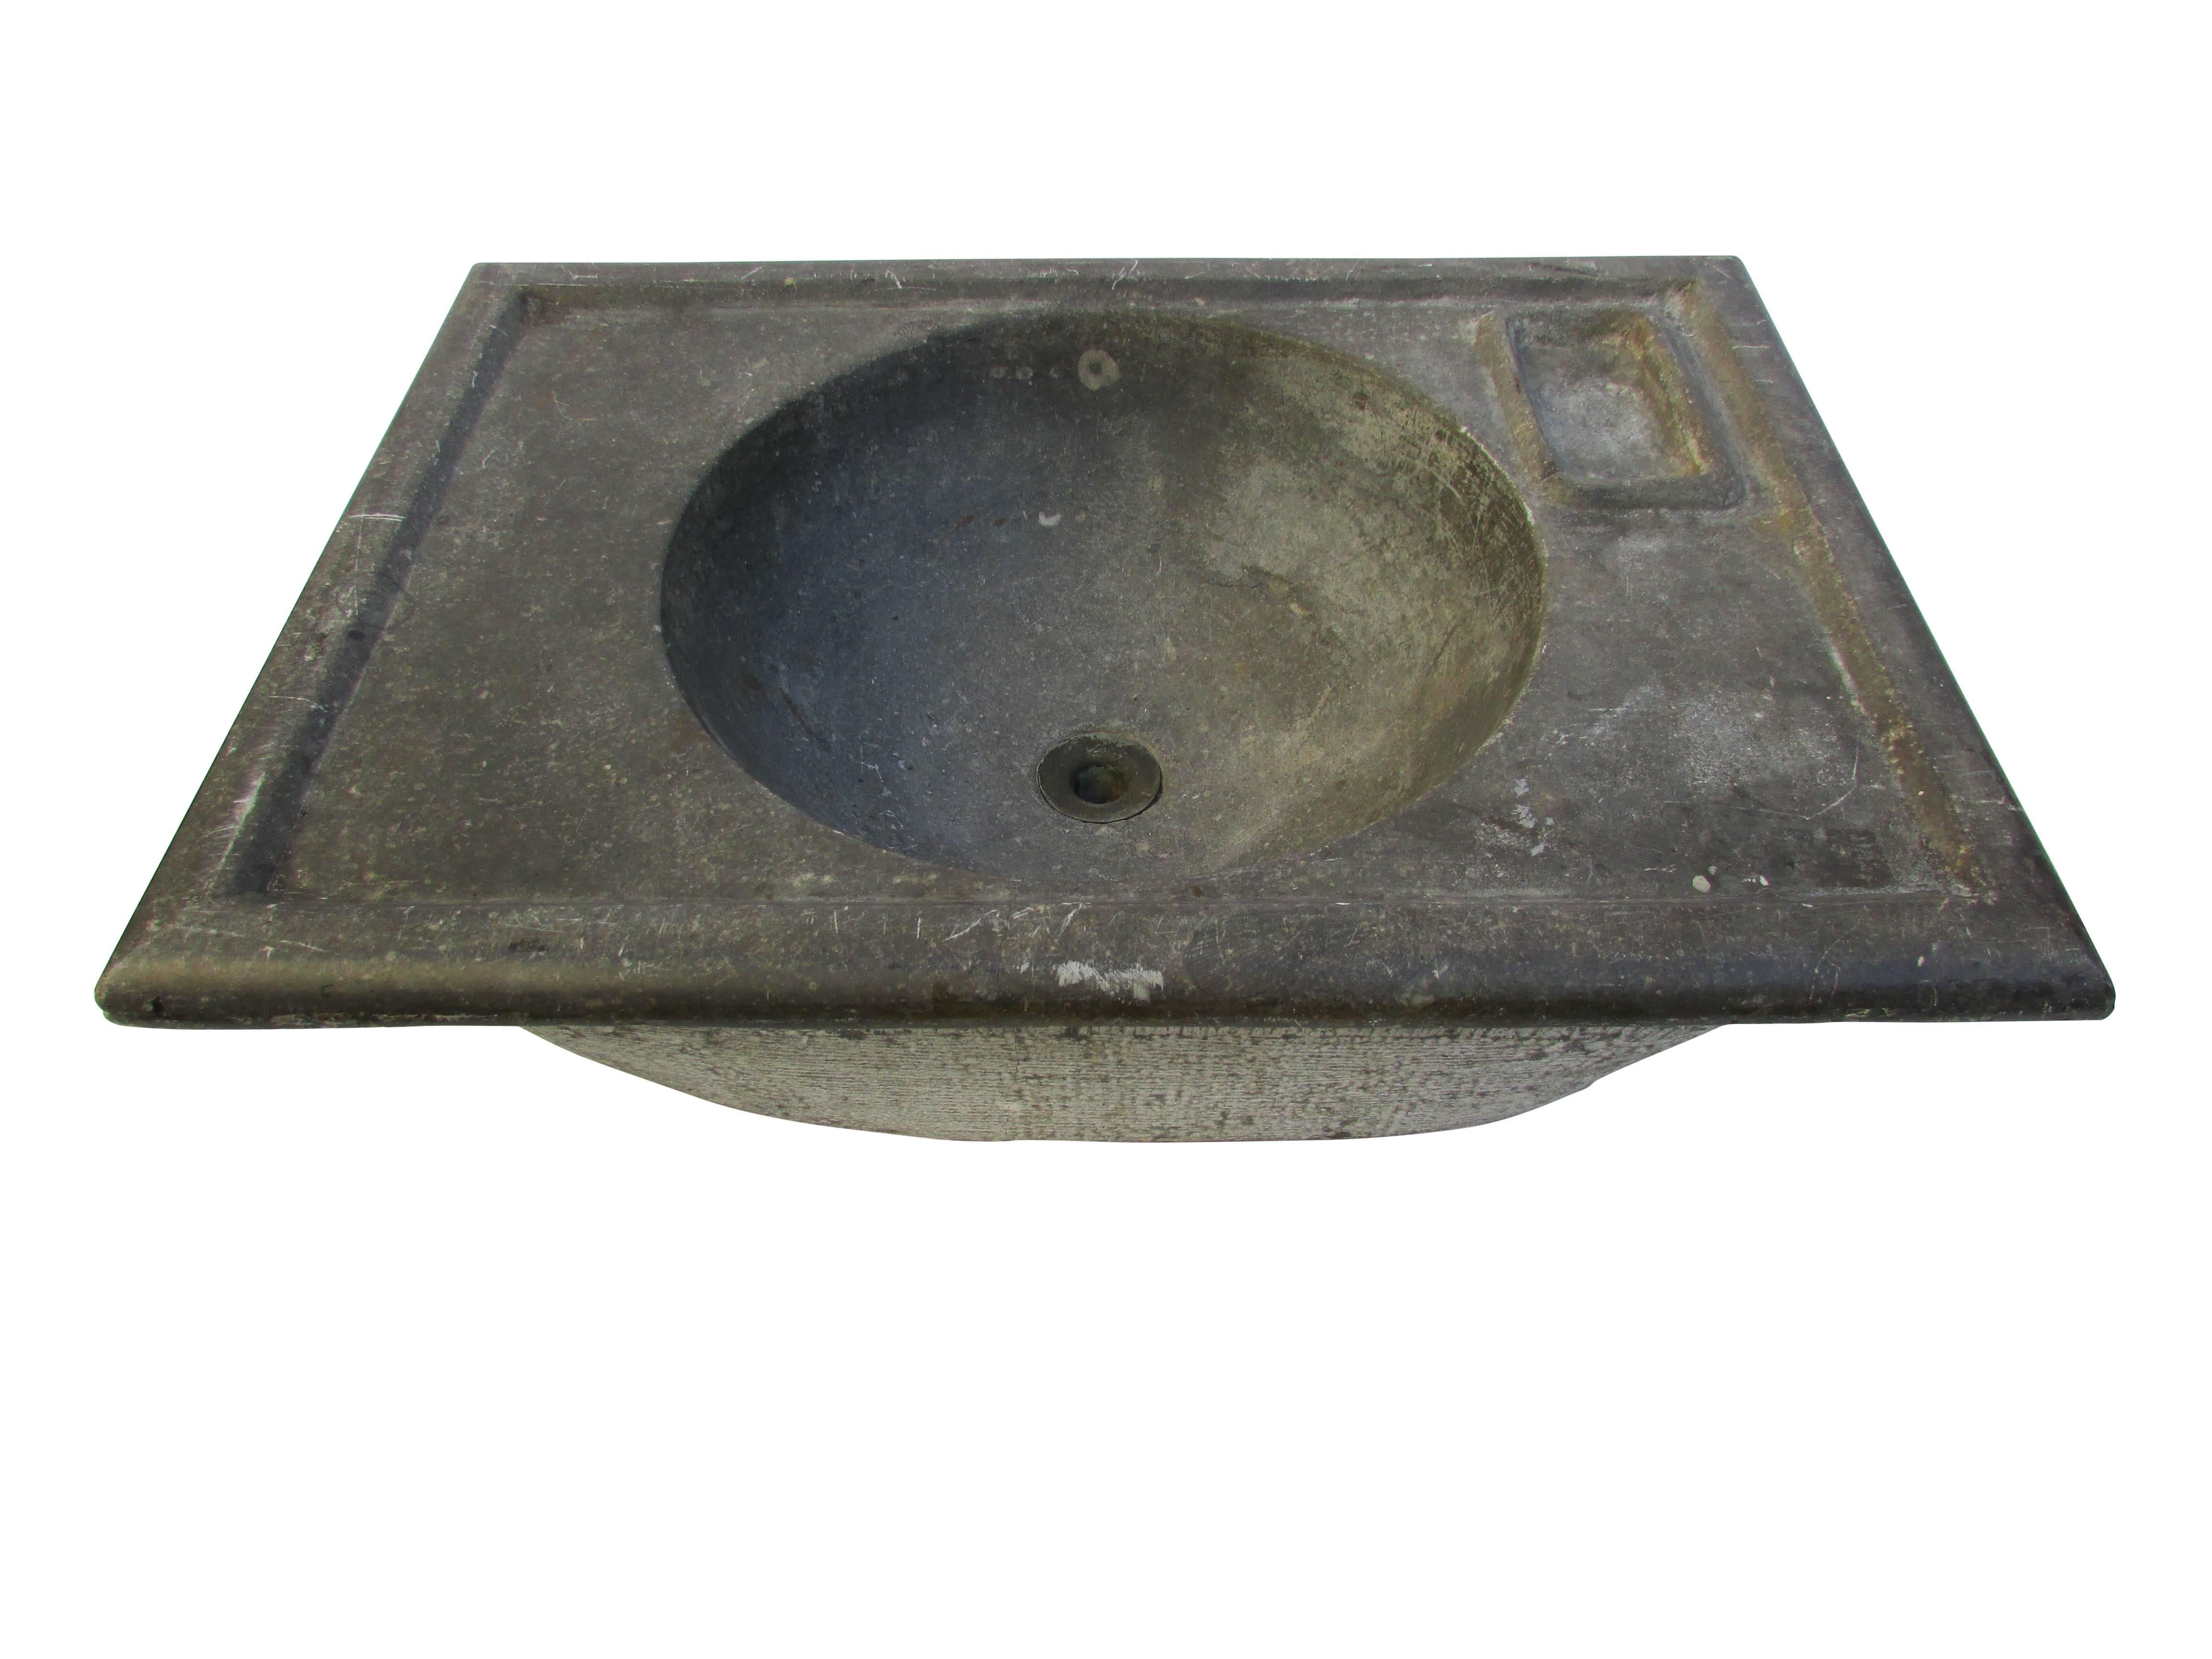 This is a beautiful turn of the century soapstone sink with soap dish and brass drain.